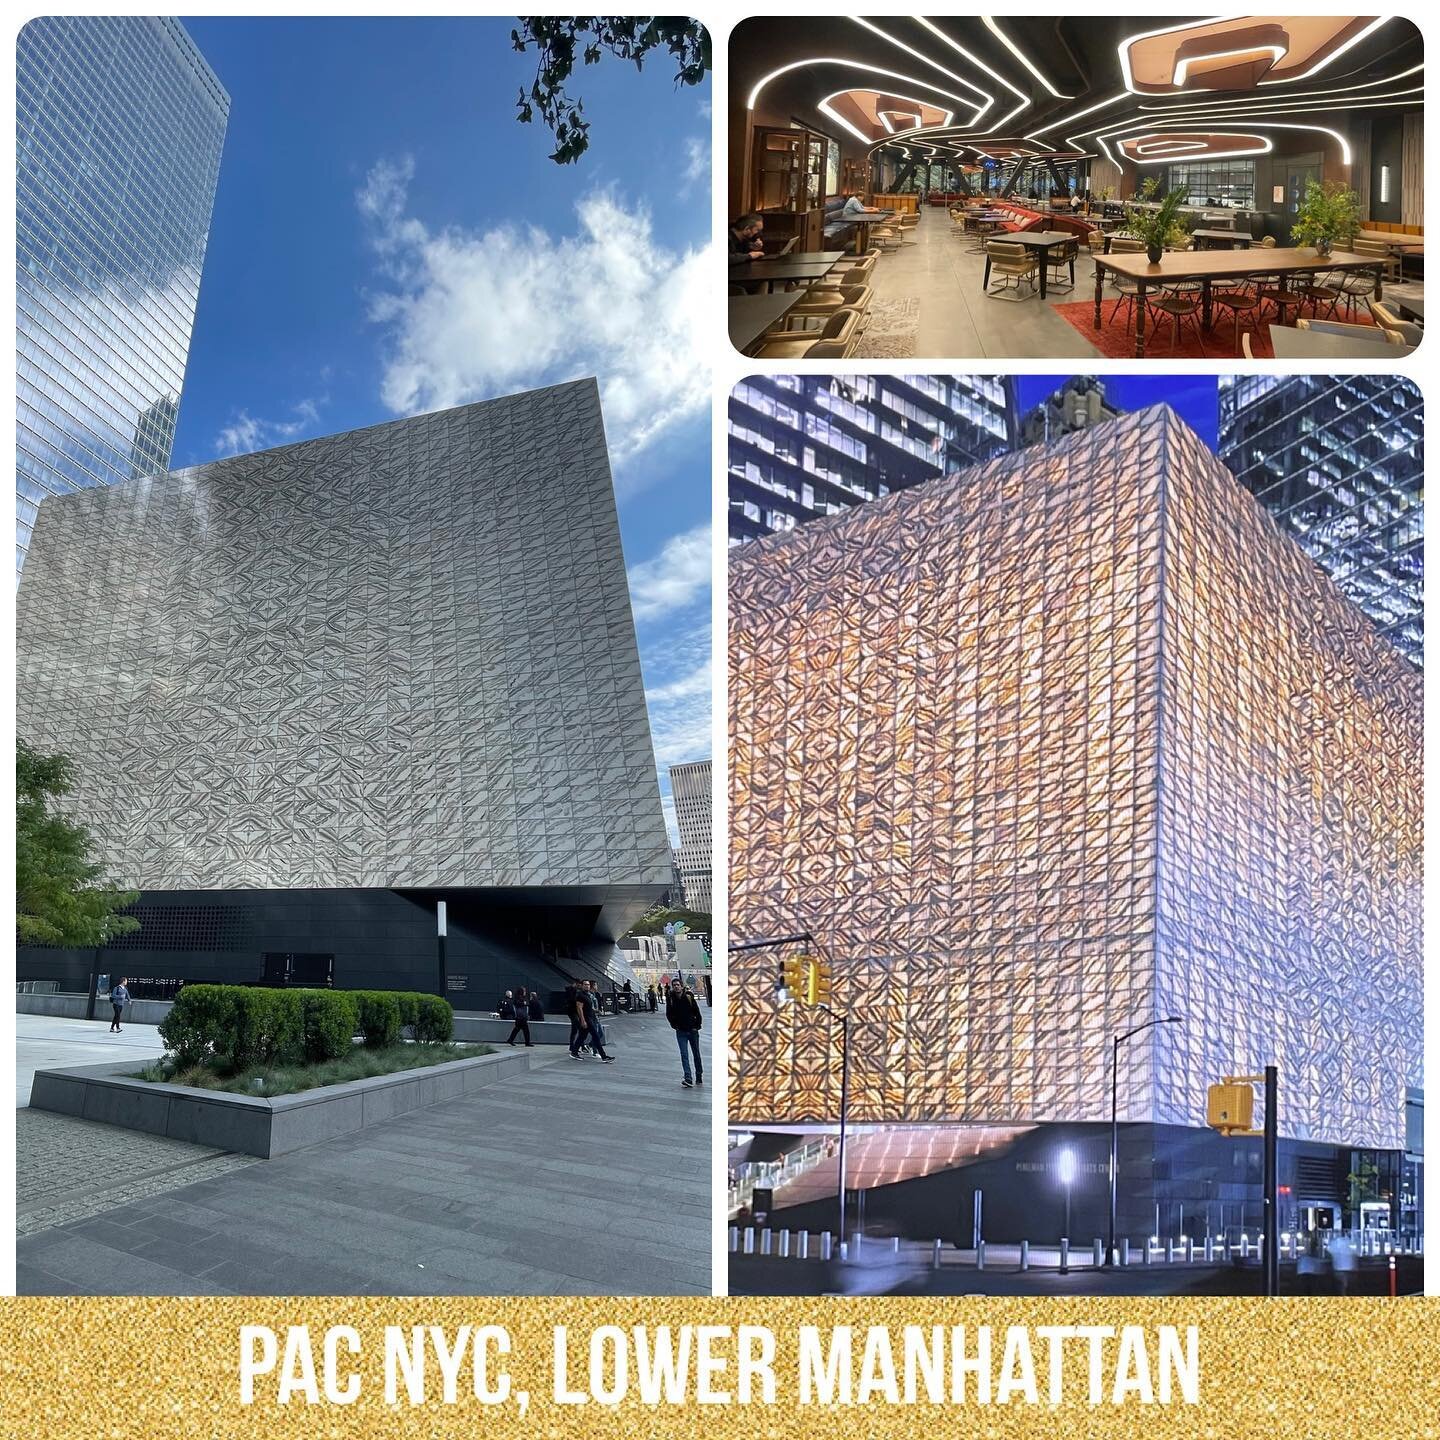 #PACNYC is a #brandnew #performingartscenter in #LowerManhattan #cuttingedgearchitecture by #REX The #cube is covered in 5000 panels of veined #Portuguese marble which glows from within at night. The restaurant/bar is already a busy #workhub for loca